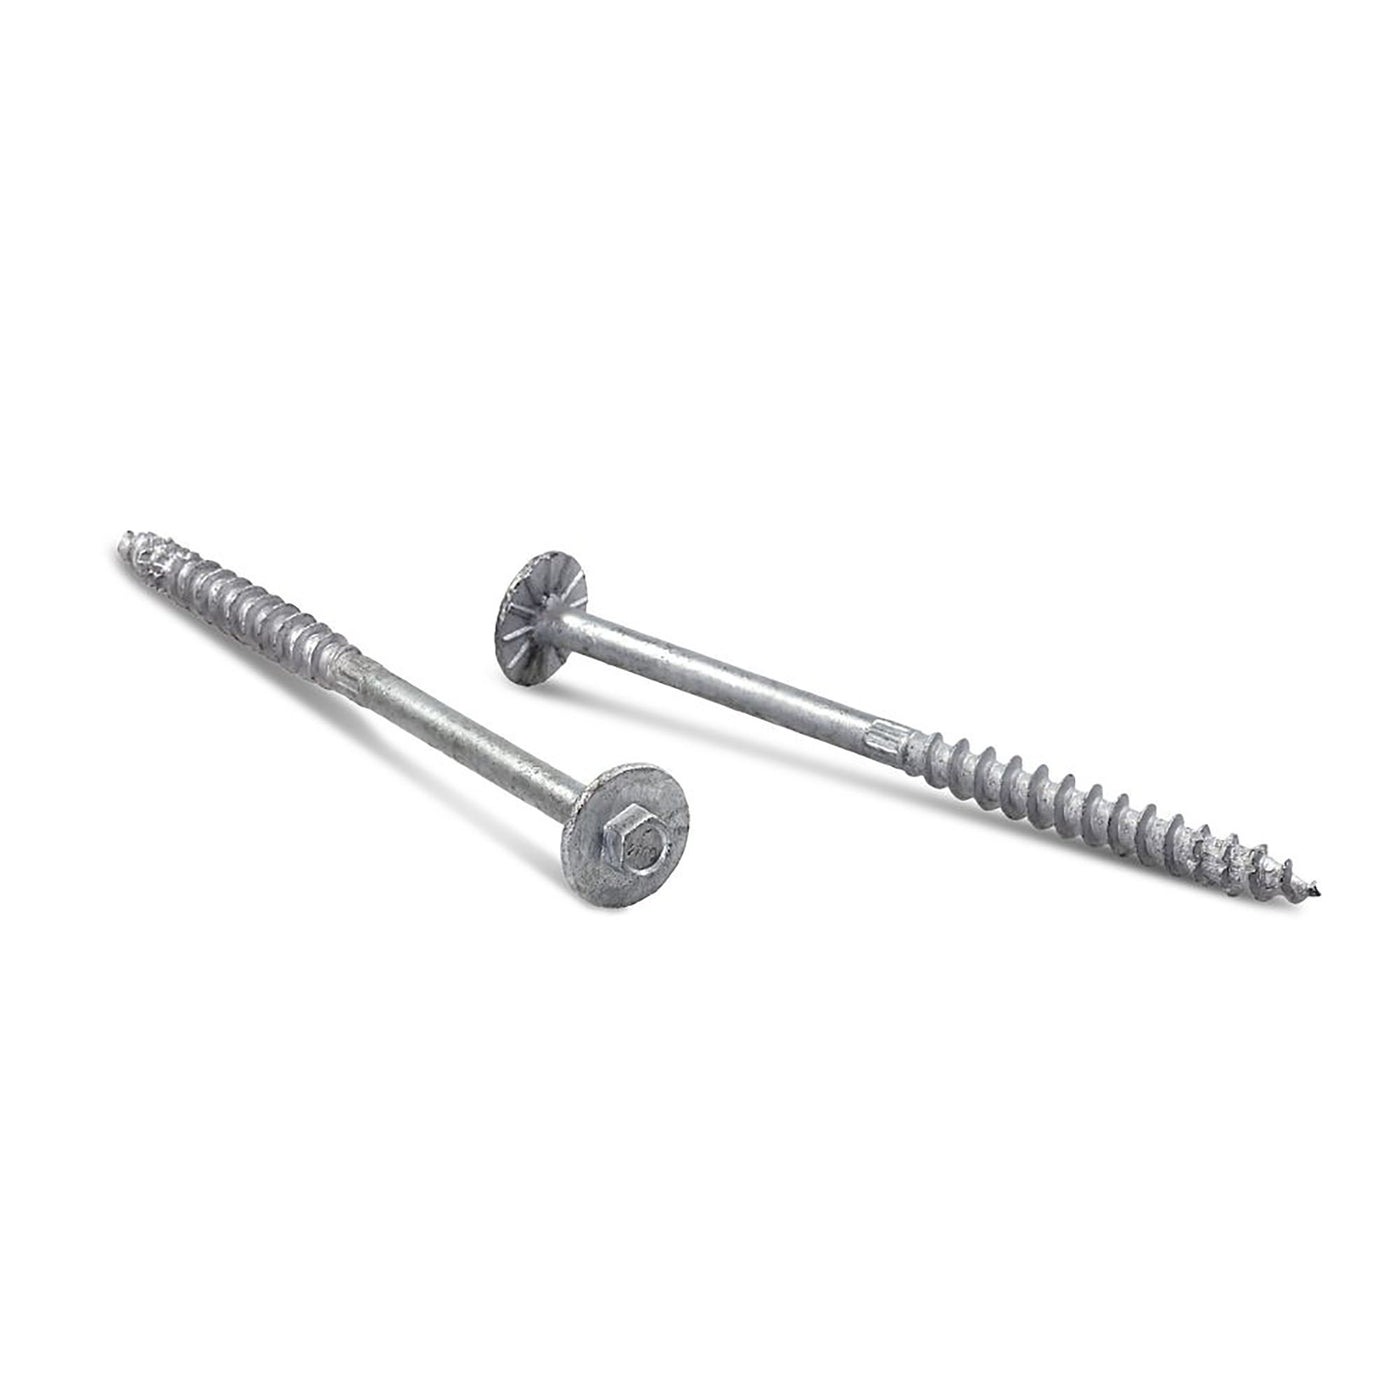 0.276 x 4 Simpson Strong-Drive® SDWH TIMBER-HEX Hot Dipped Galvanized 3/8 in. Hex Head Screw - Box (150)